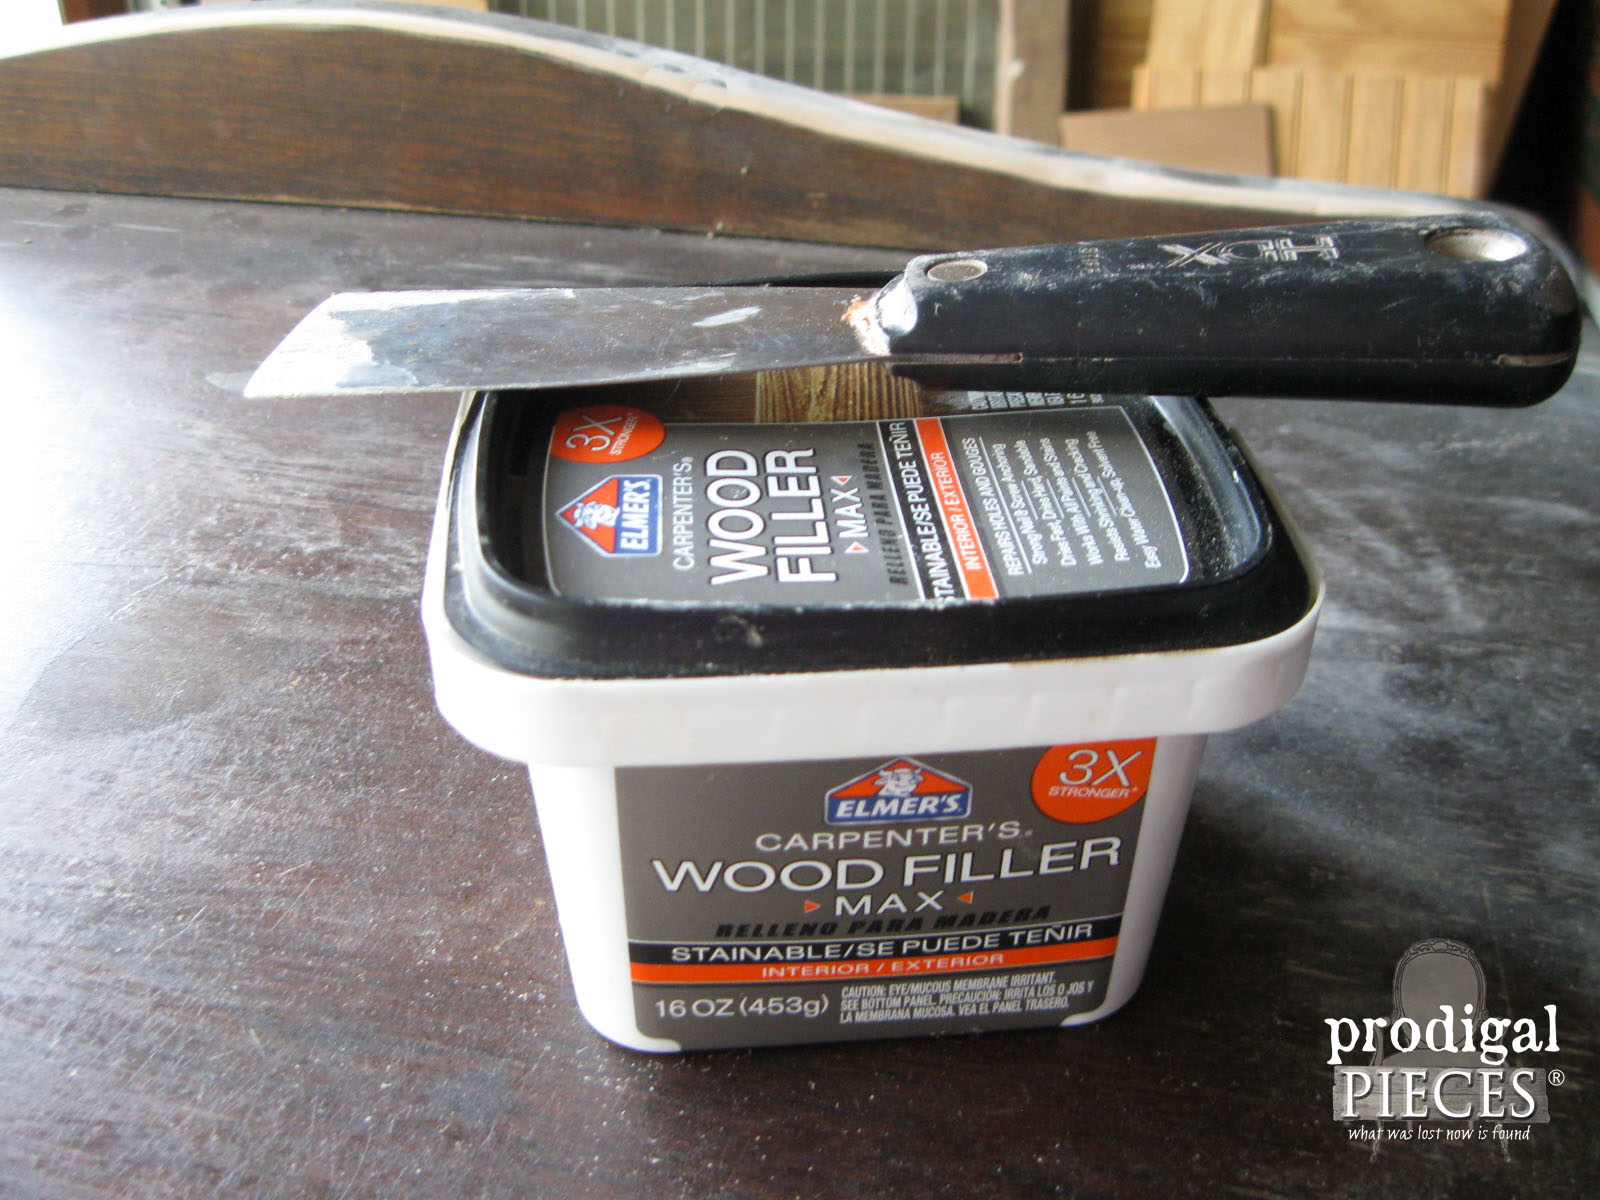 Elmer's Wood Filler for Making Repairs | Prodigal Pieces | www.prodigalpieces.com